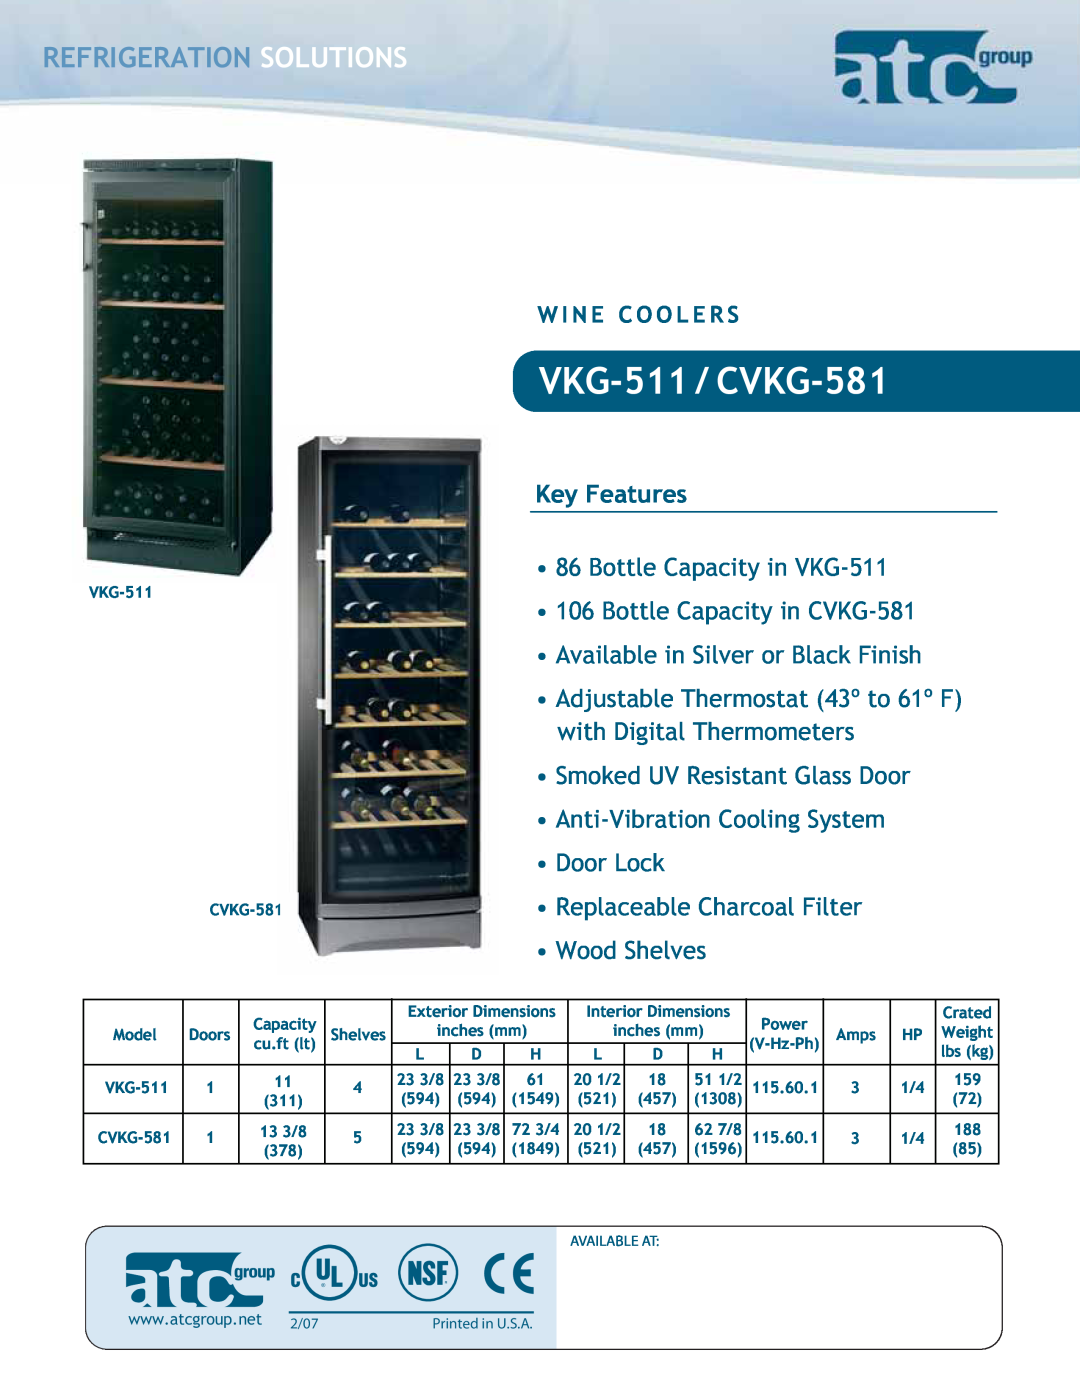 ATC Group dimensions Refrigeration Solutions, VKG-511 / CVKG-581, Key Features 